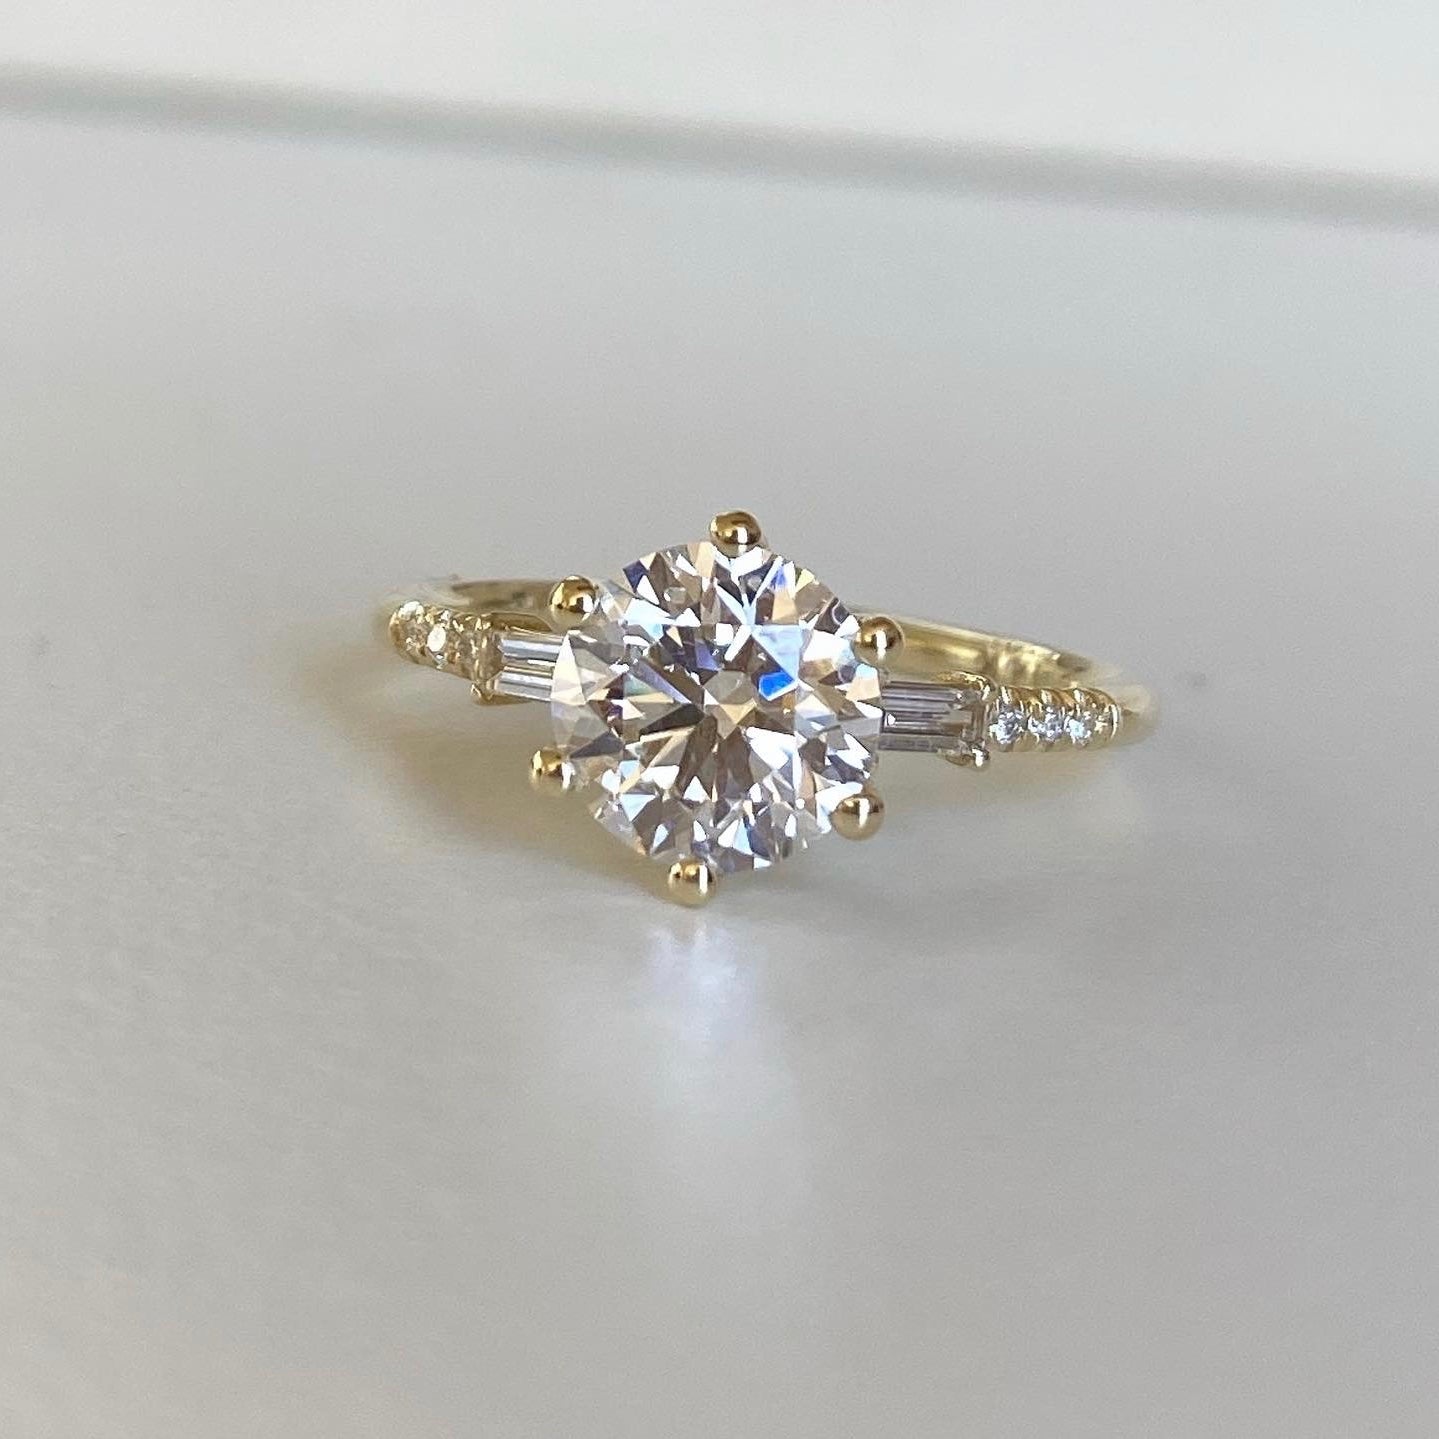 14k yellow gold custom engagement ring with round cut white diamond center stone and white diamond baguette and pave white diamonds